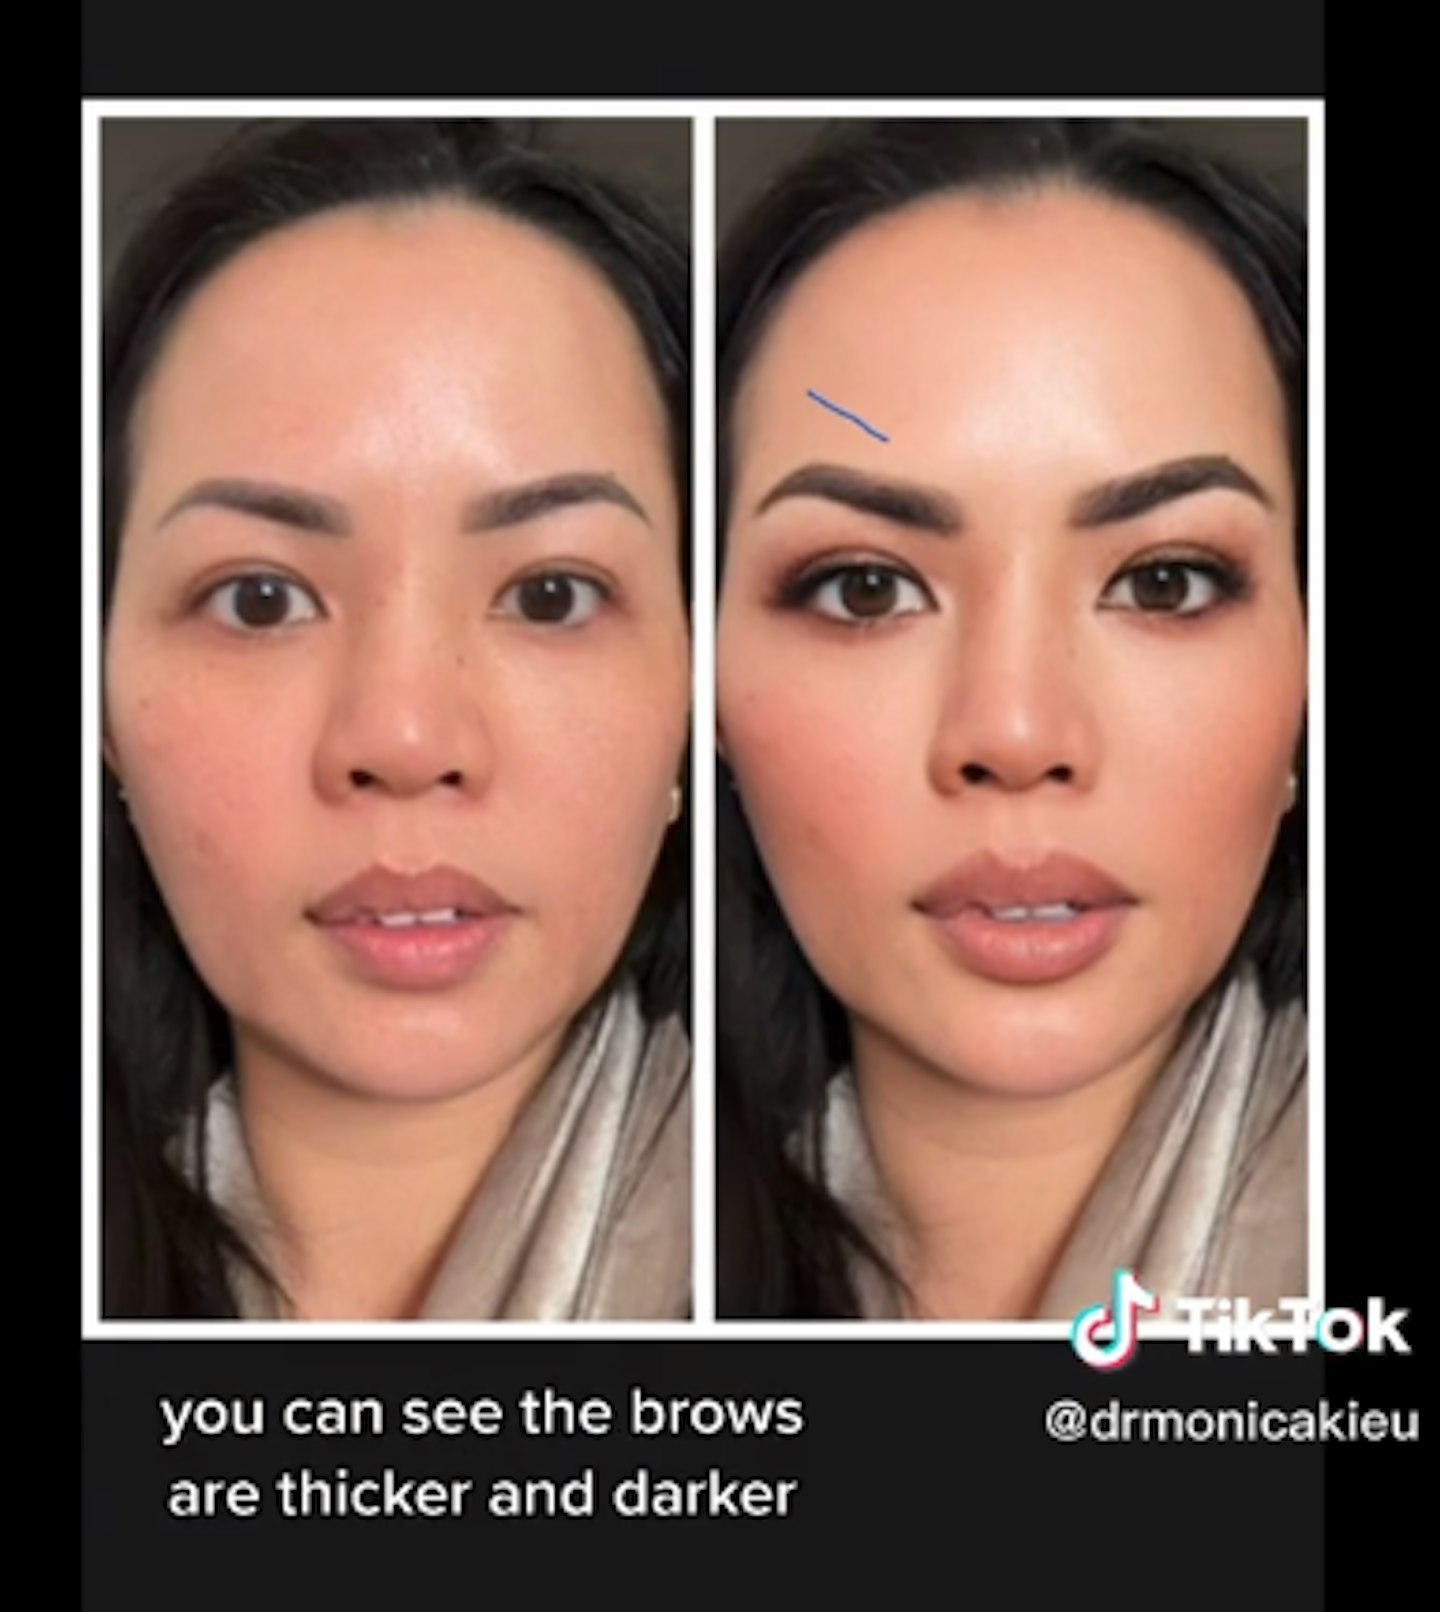 TikTok Bold Glamour filter: How to tell if someone is using it.